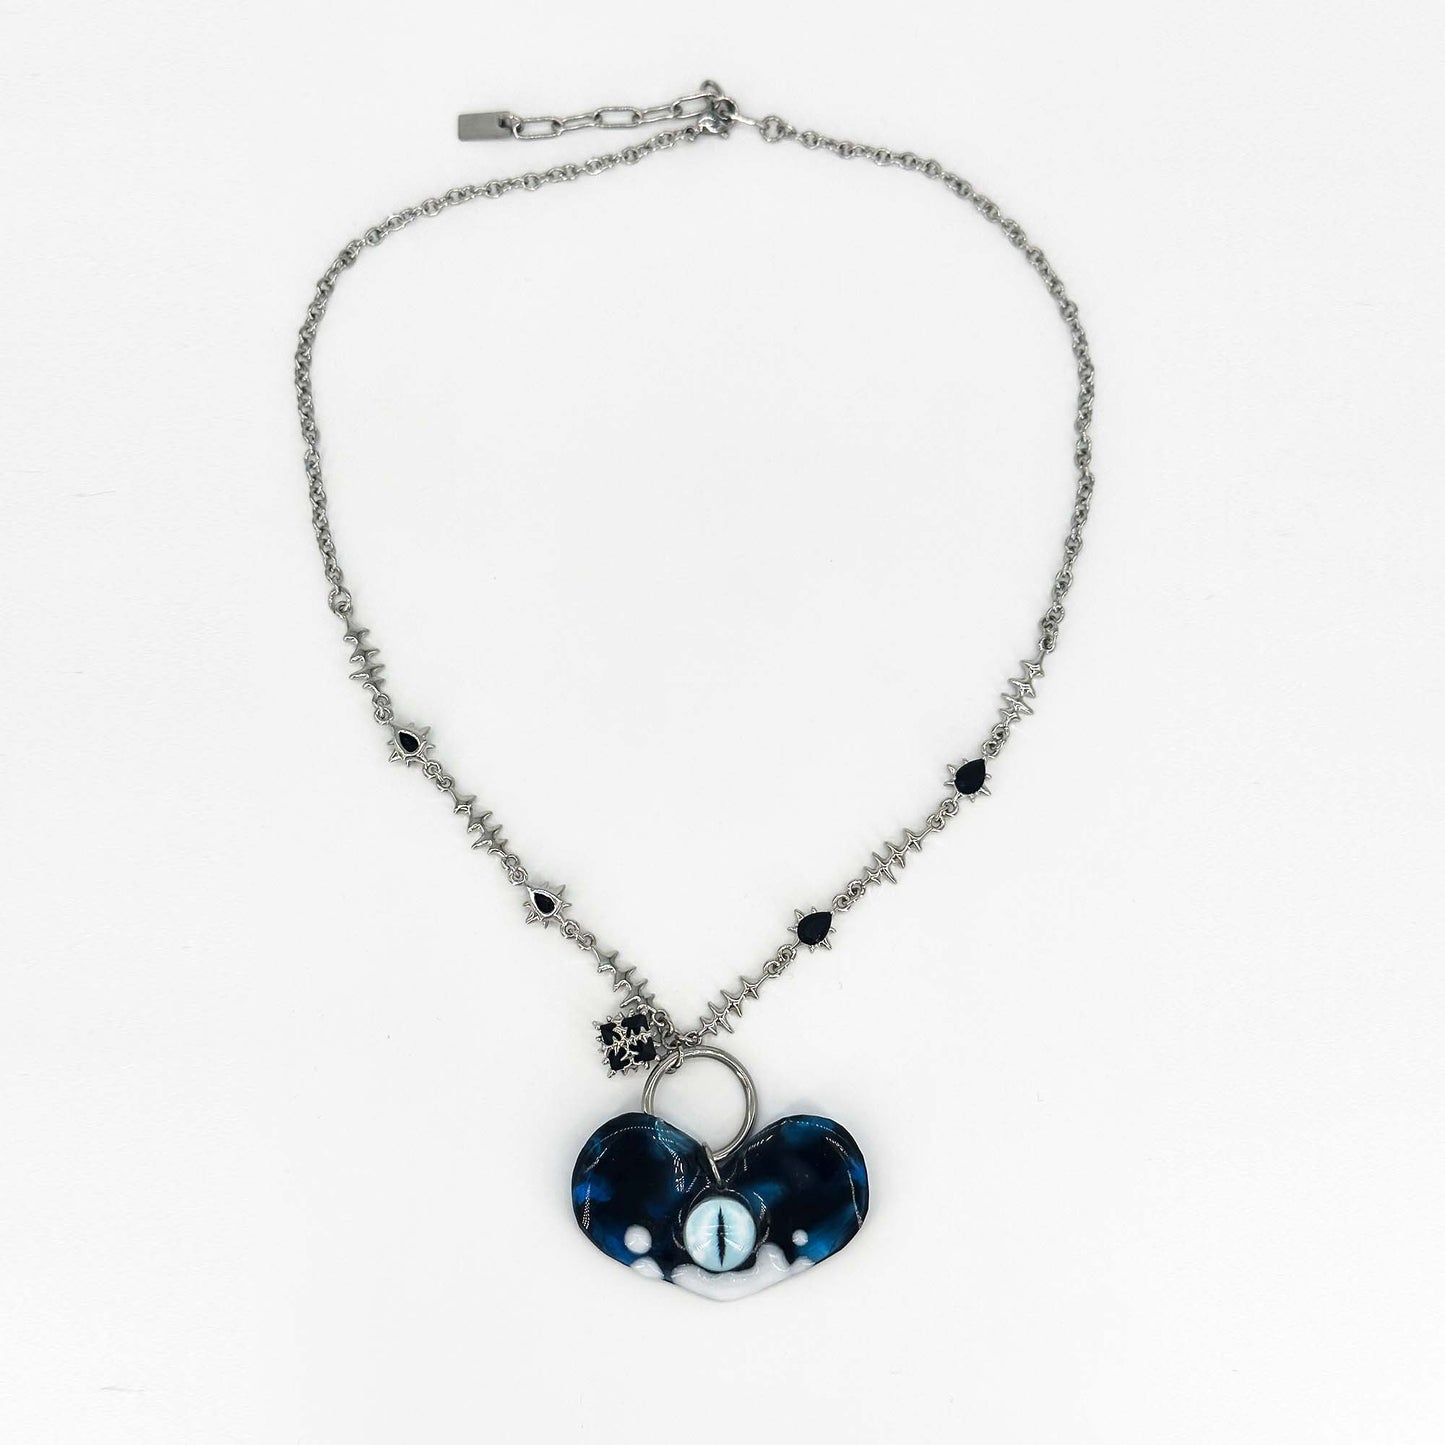 Handmade necklace made of resin in the shape of a heart and eye elements